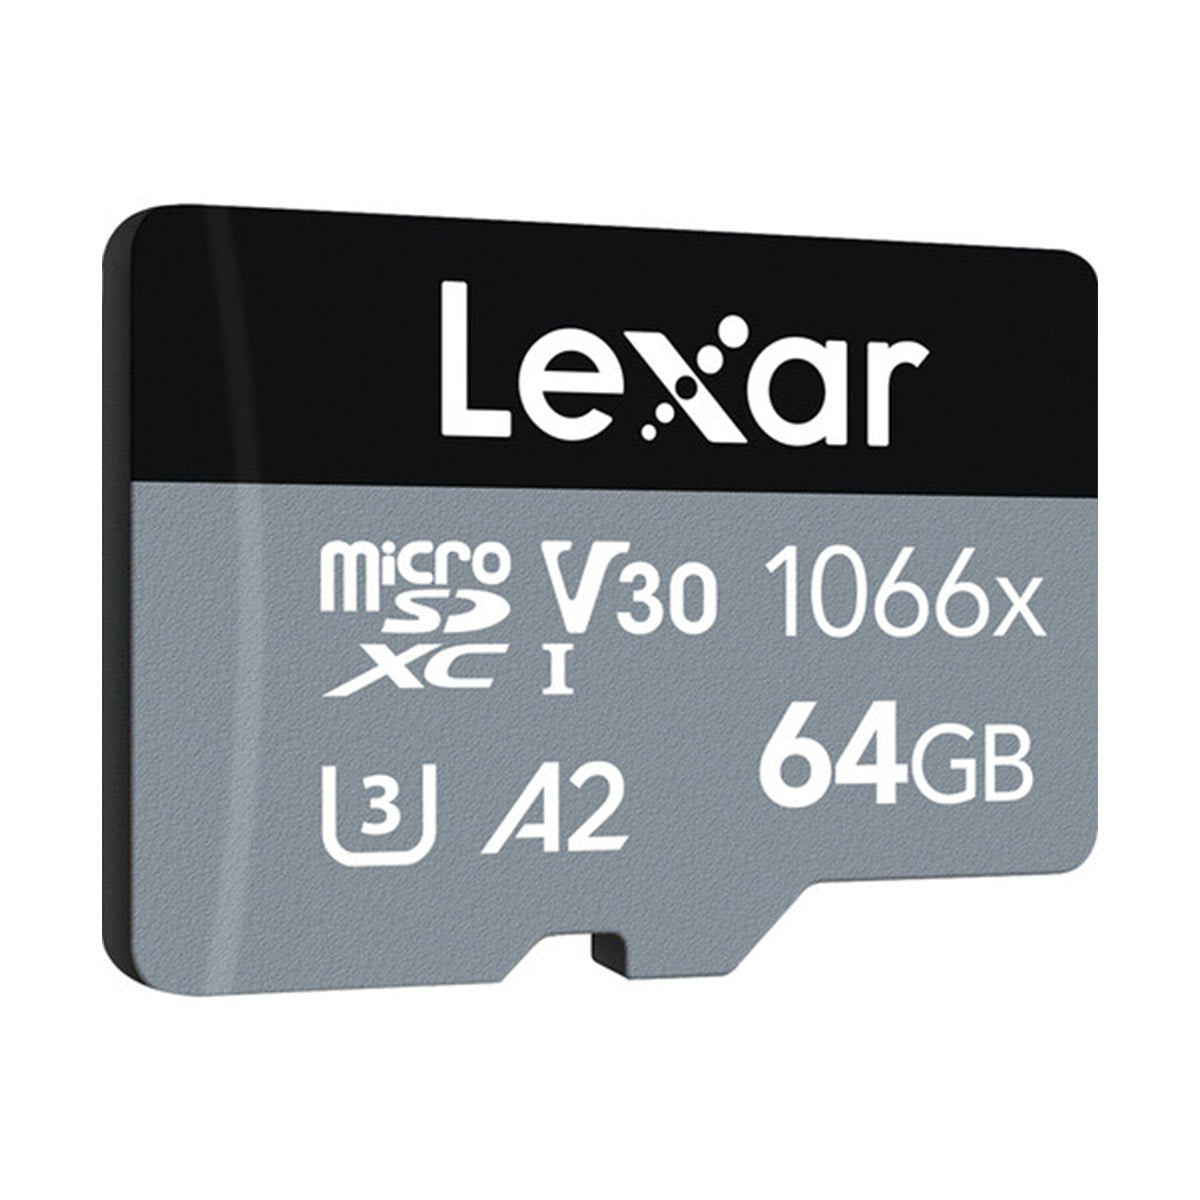 Lexar 64GB Professional 1066x UHS-I microSDXC Memory Card with SD Adapter